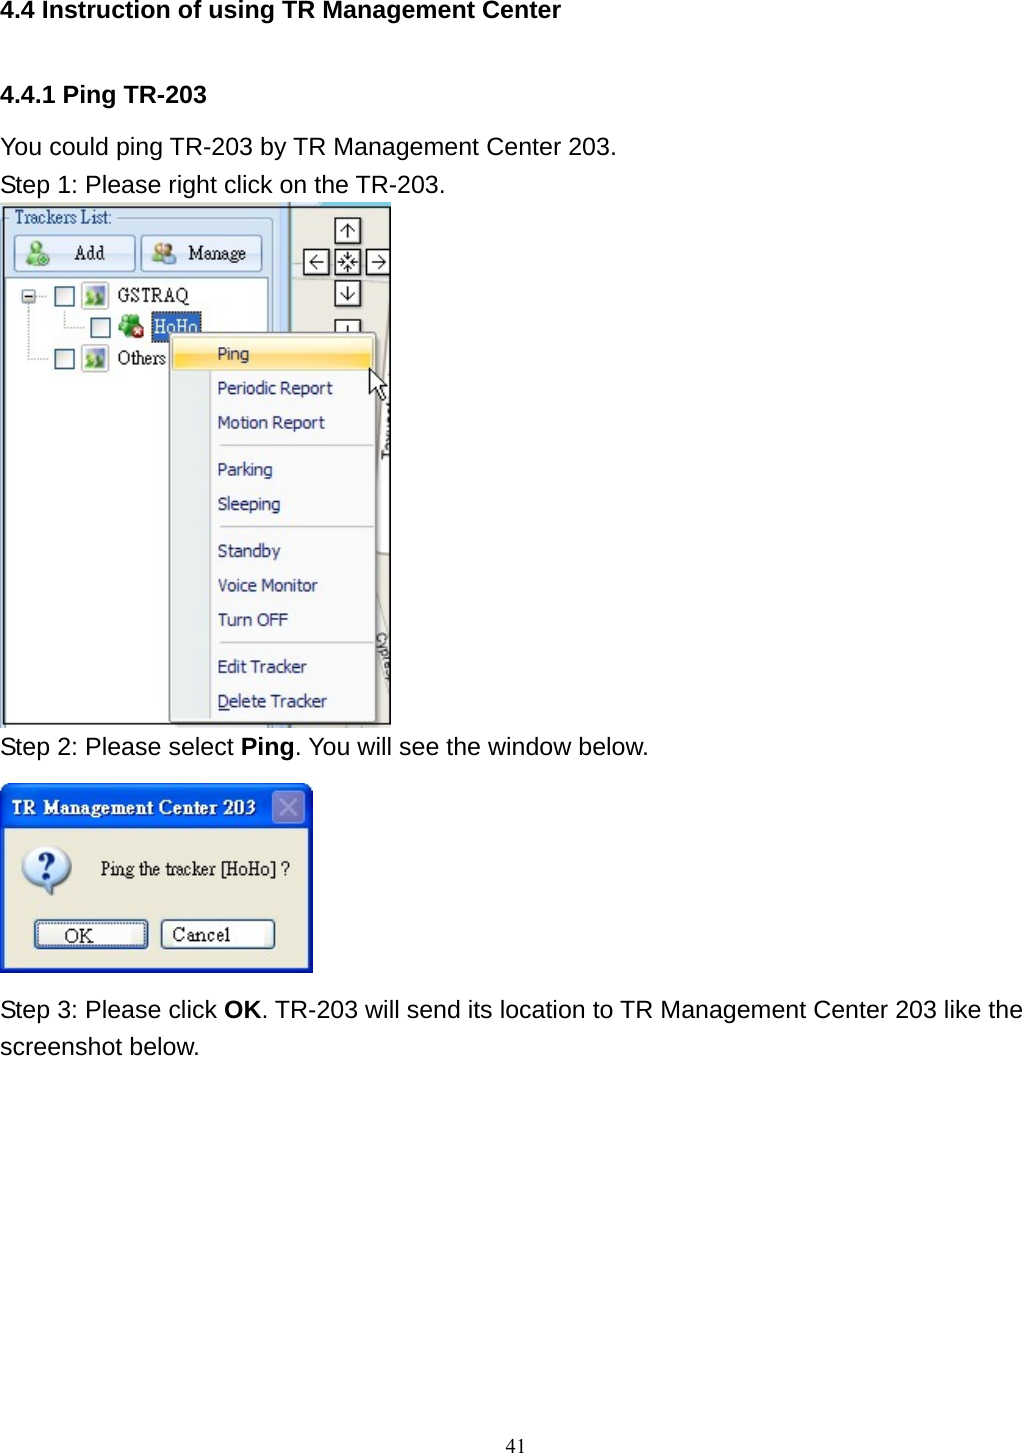  4.4 Instruction of using TR Management Center  4.4.1 Ping TR-203 You could ping TR-203 by TR Management Center 203. Step 1: Please right click on the TR-203.  Step 2: Please select Ping. You will see the window below.  Step 3: Please click OK. TR-203 will send its location to TR Management Center 203 like the screenshot below.   41